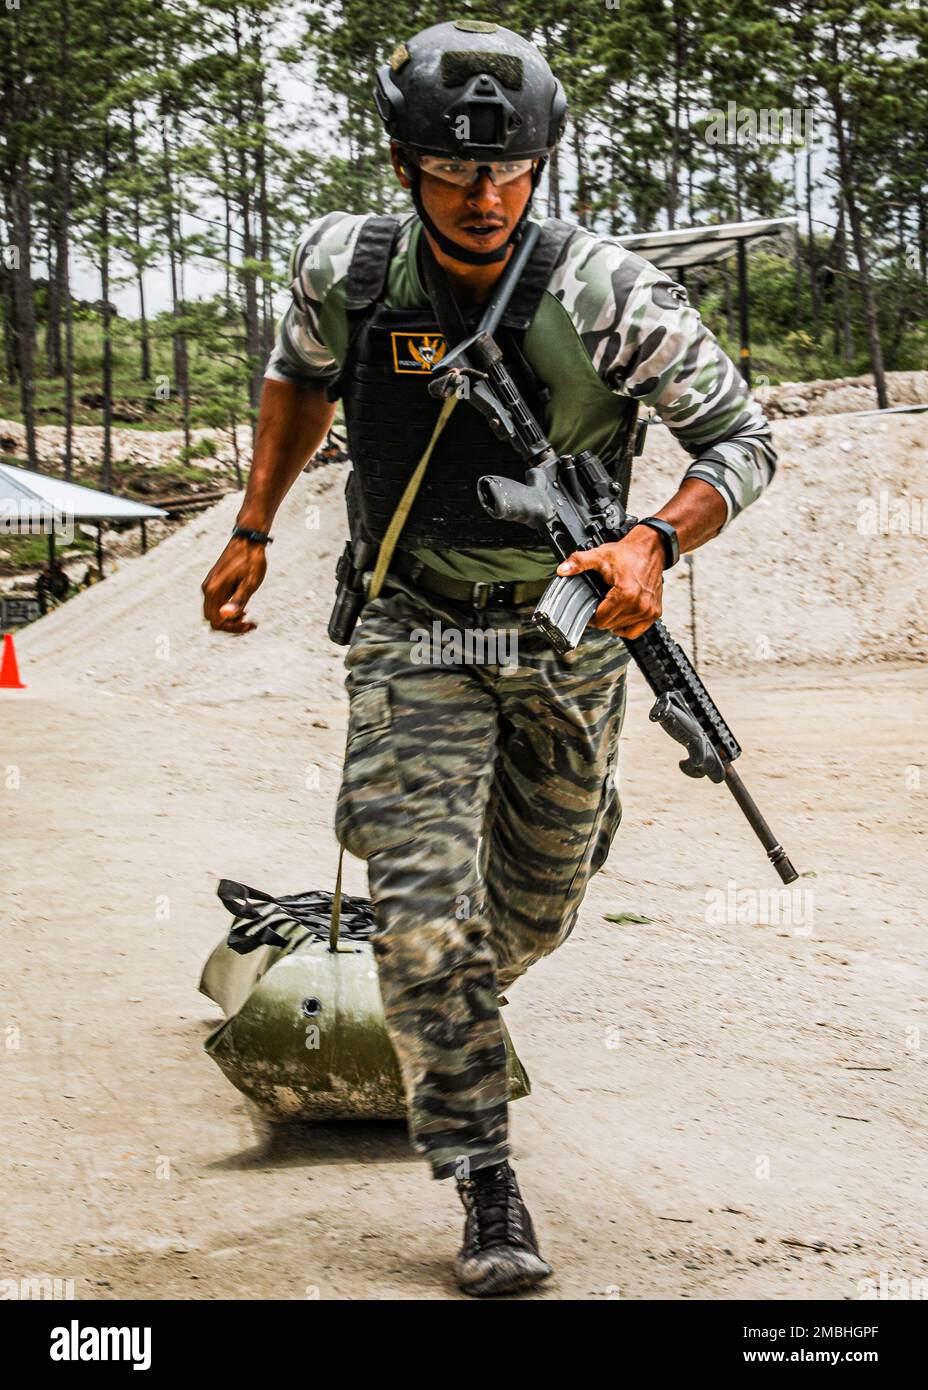 A Panamanian Soldier drags a sled during the assaulter stress test